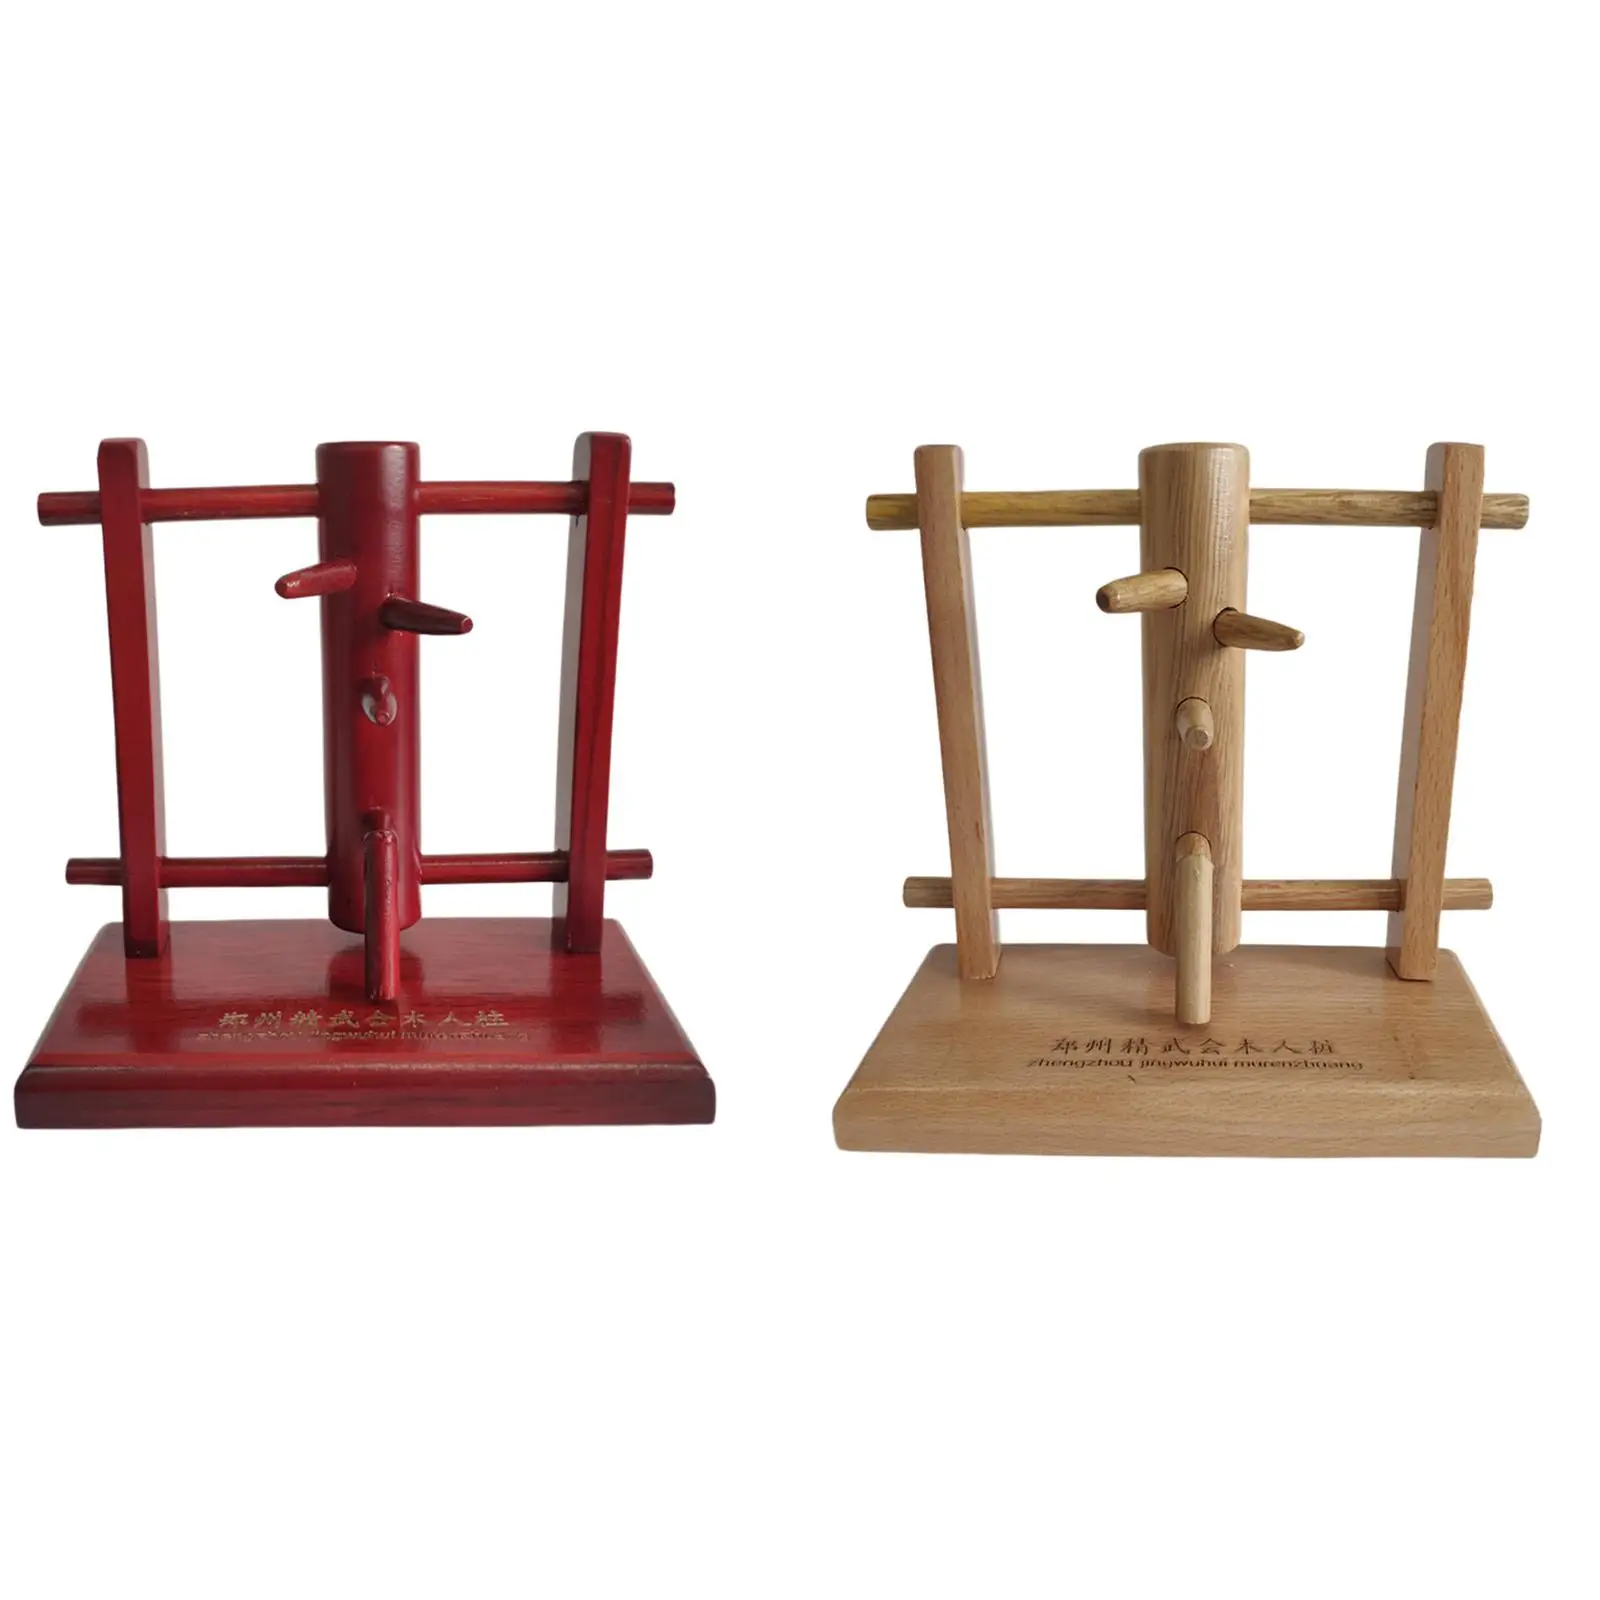 Wood  Model Display Figurine Decoration Sculpture Crafts Wing Chun Hanging Ornament for Table Car Shelves Living Room Home